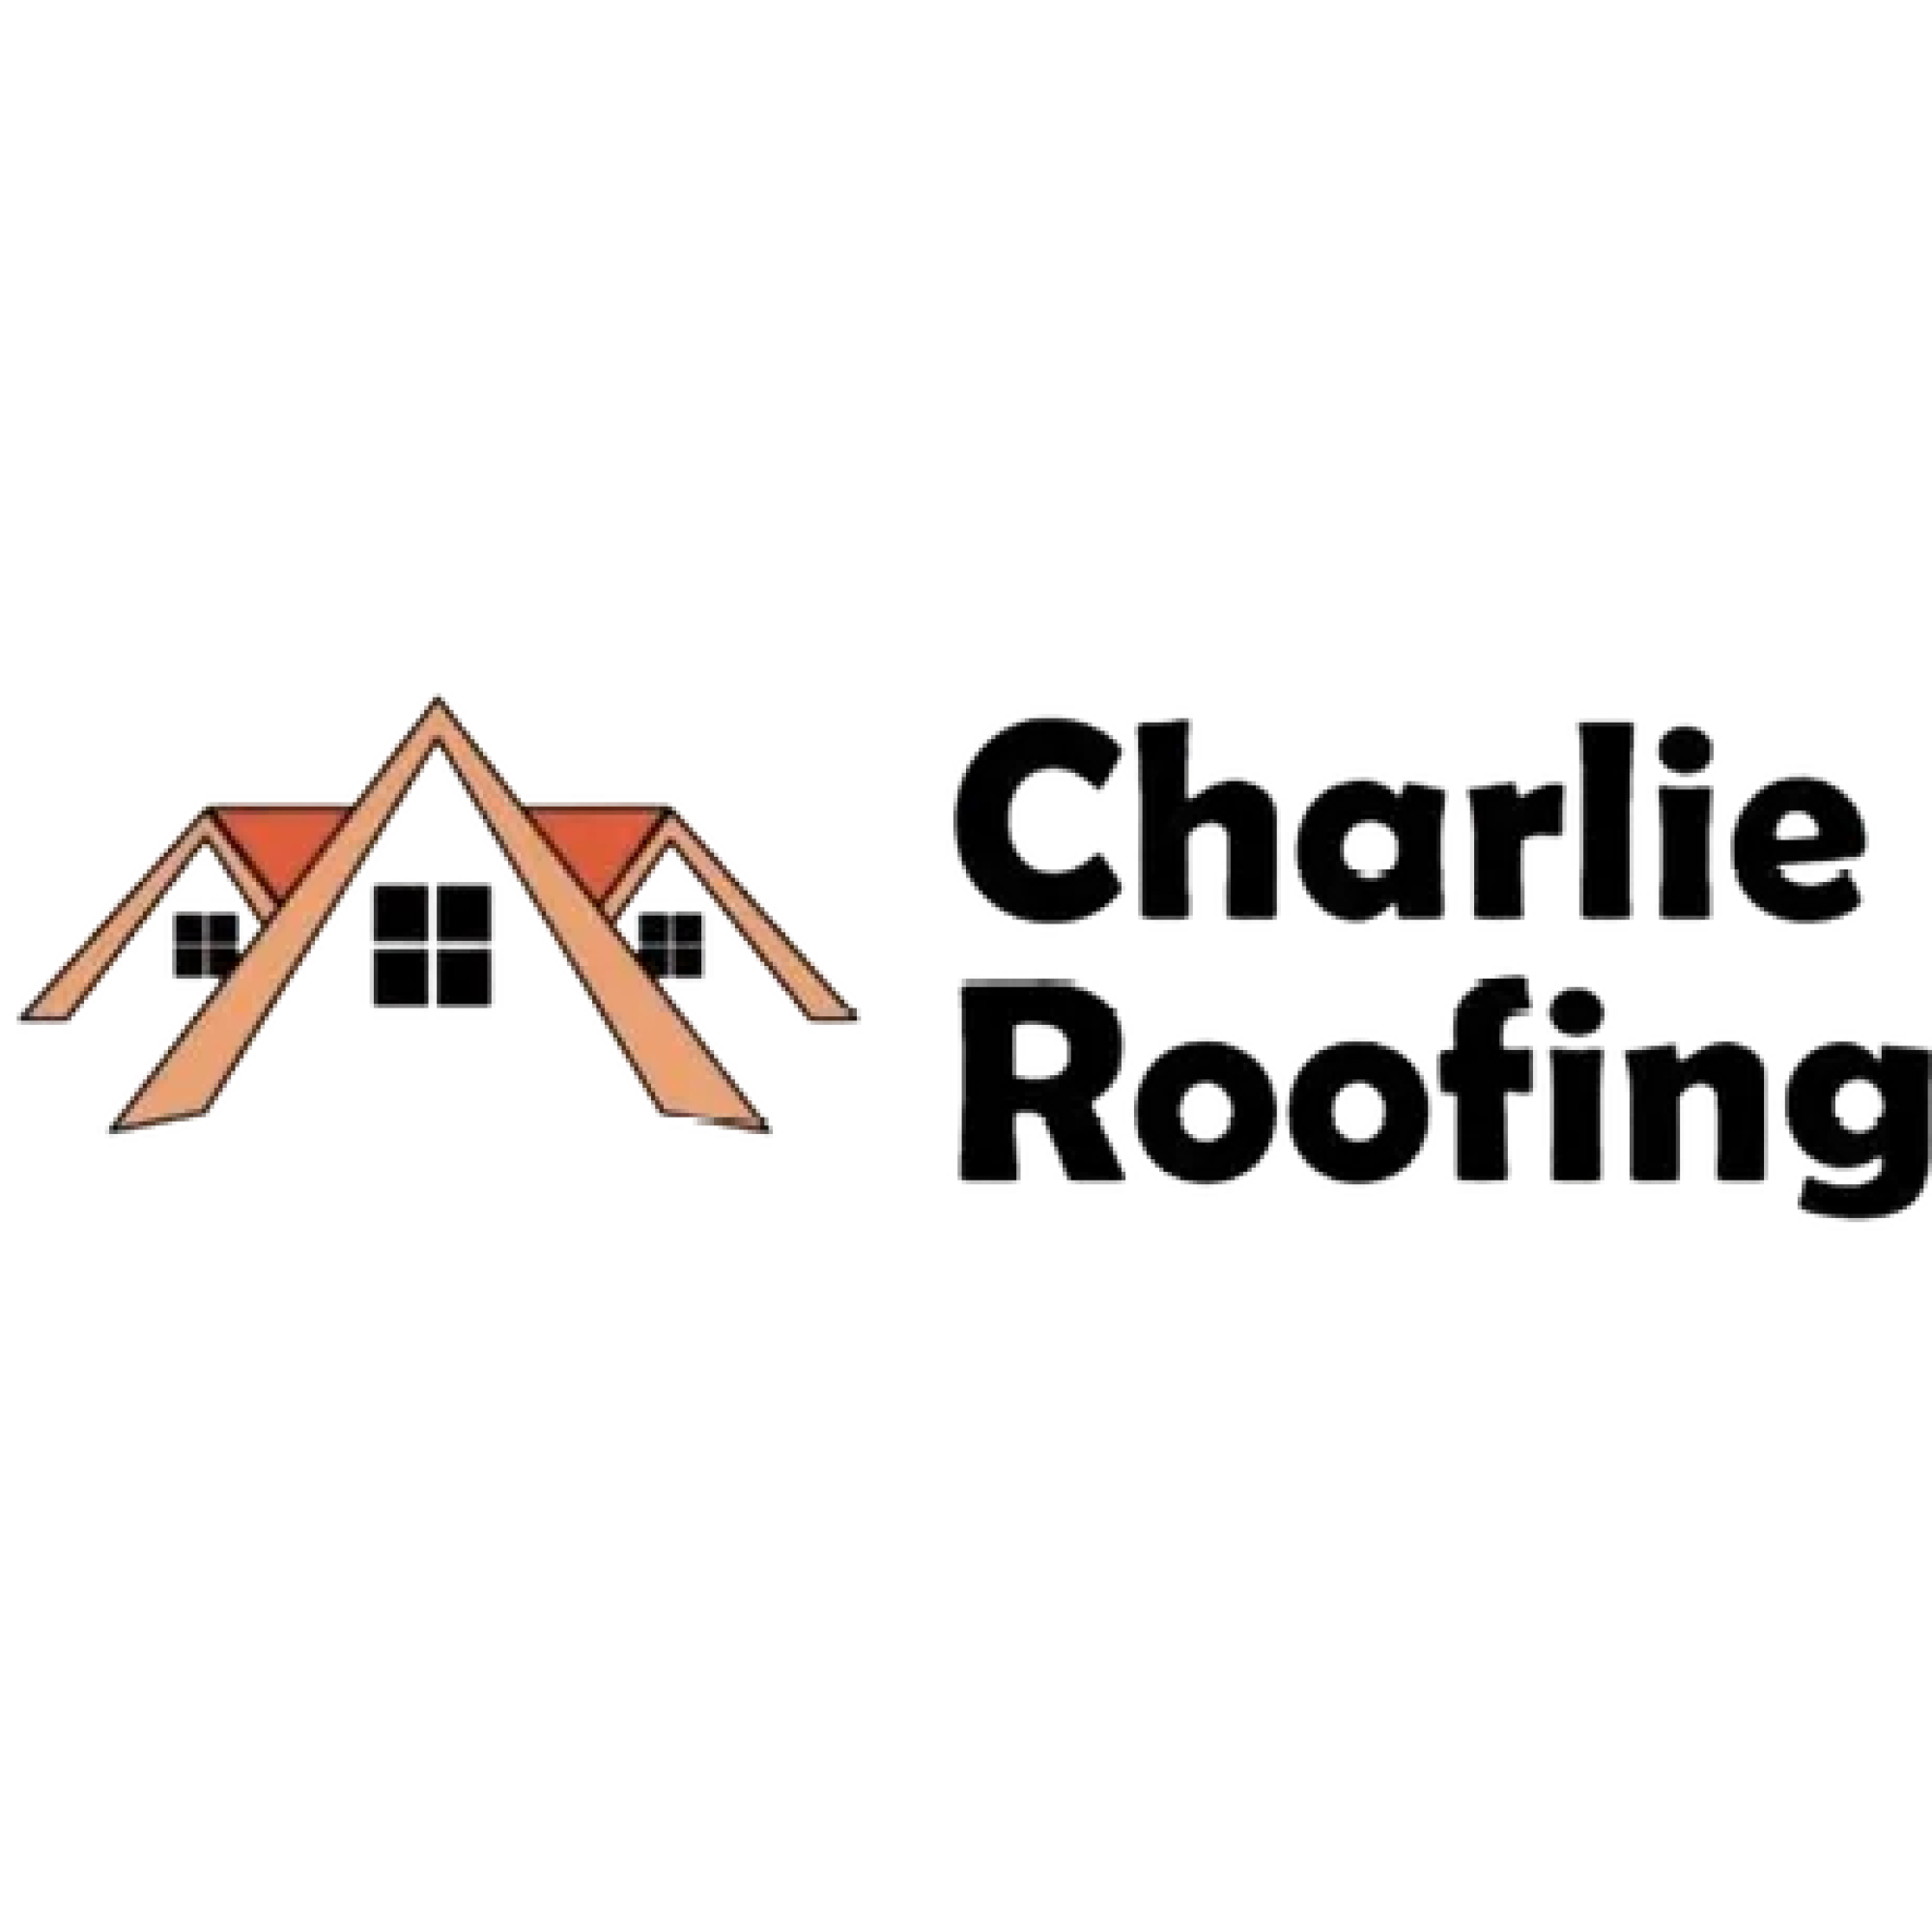 Charlie Roofing